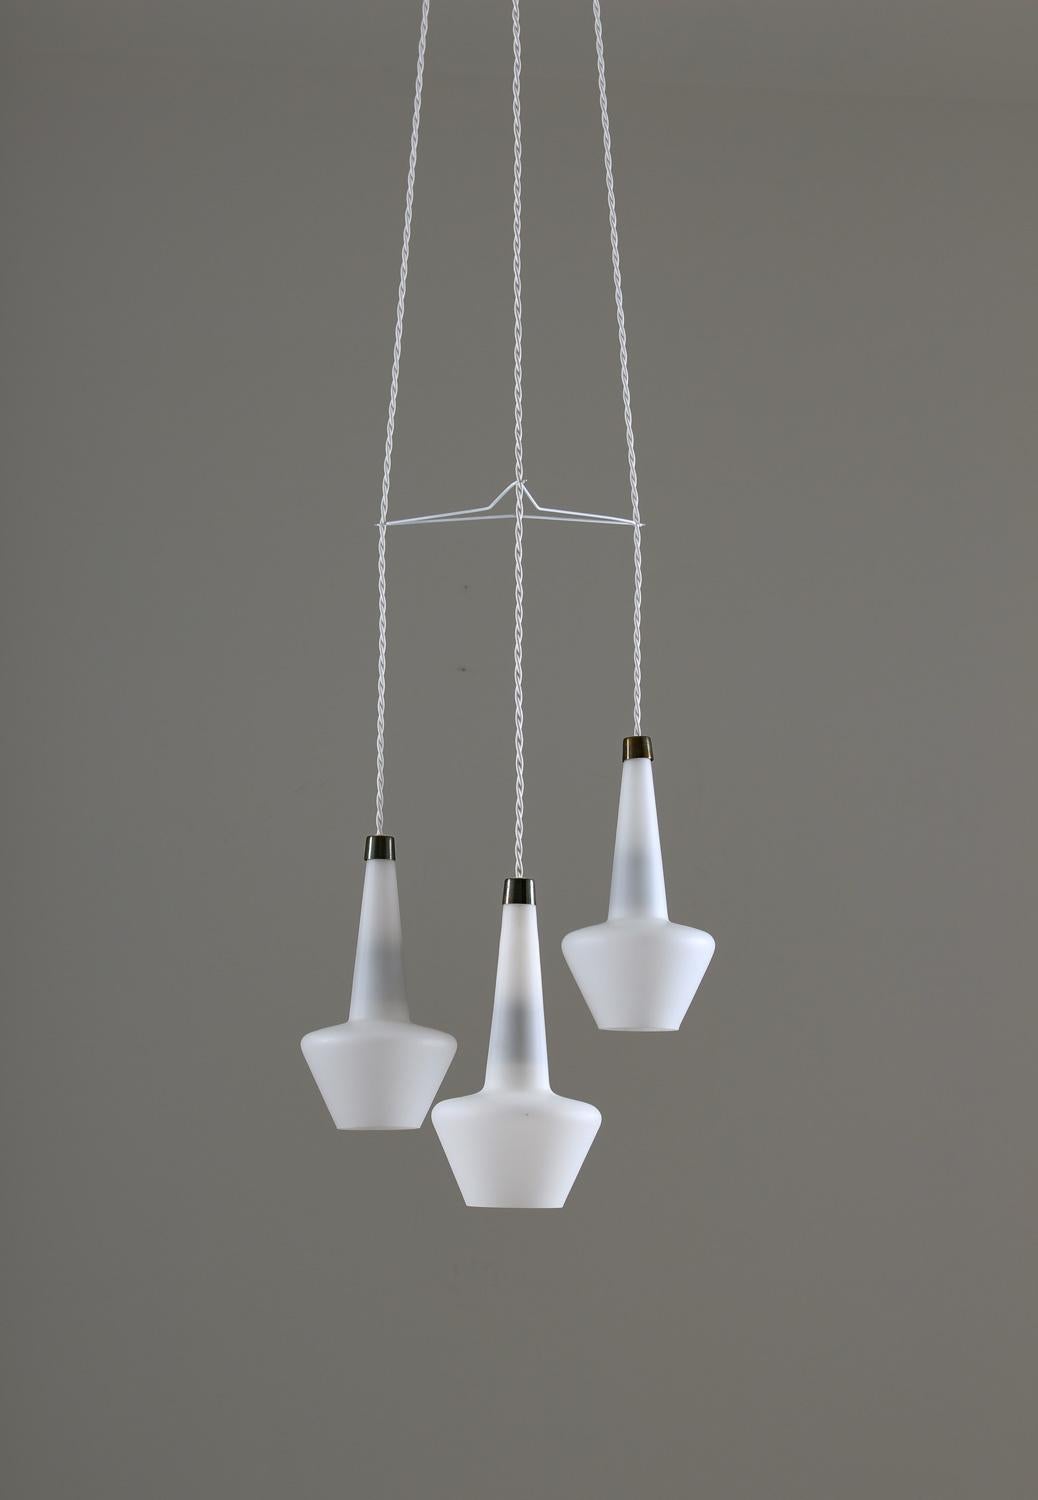 Wonderful rare pendant model T272, in opaline glass by Hans-Agne Jakobsson, 1950s
The lamp consists of three glass pendants connected by a divider in white painted metal. The light spreads beautifully from the opaline glass shades.

Condition: